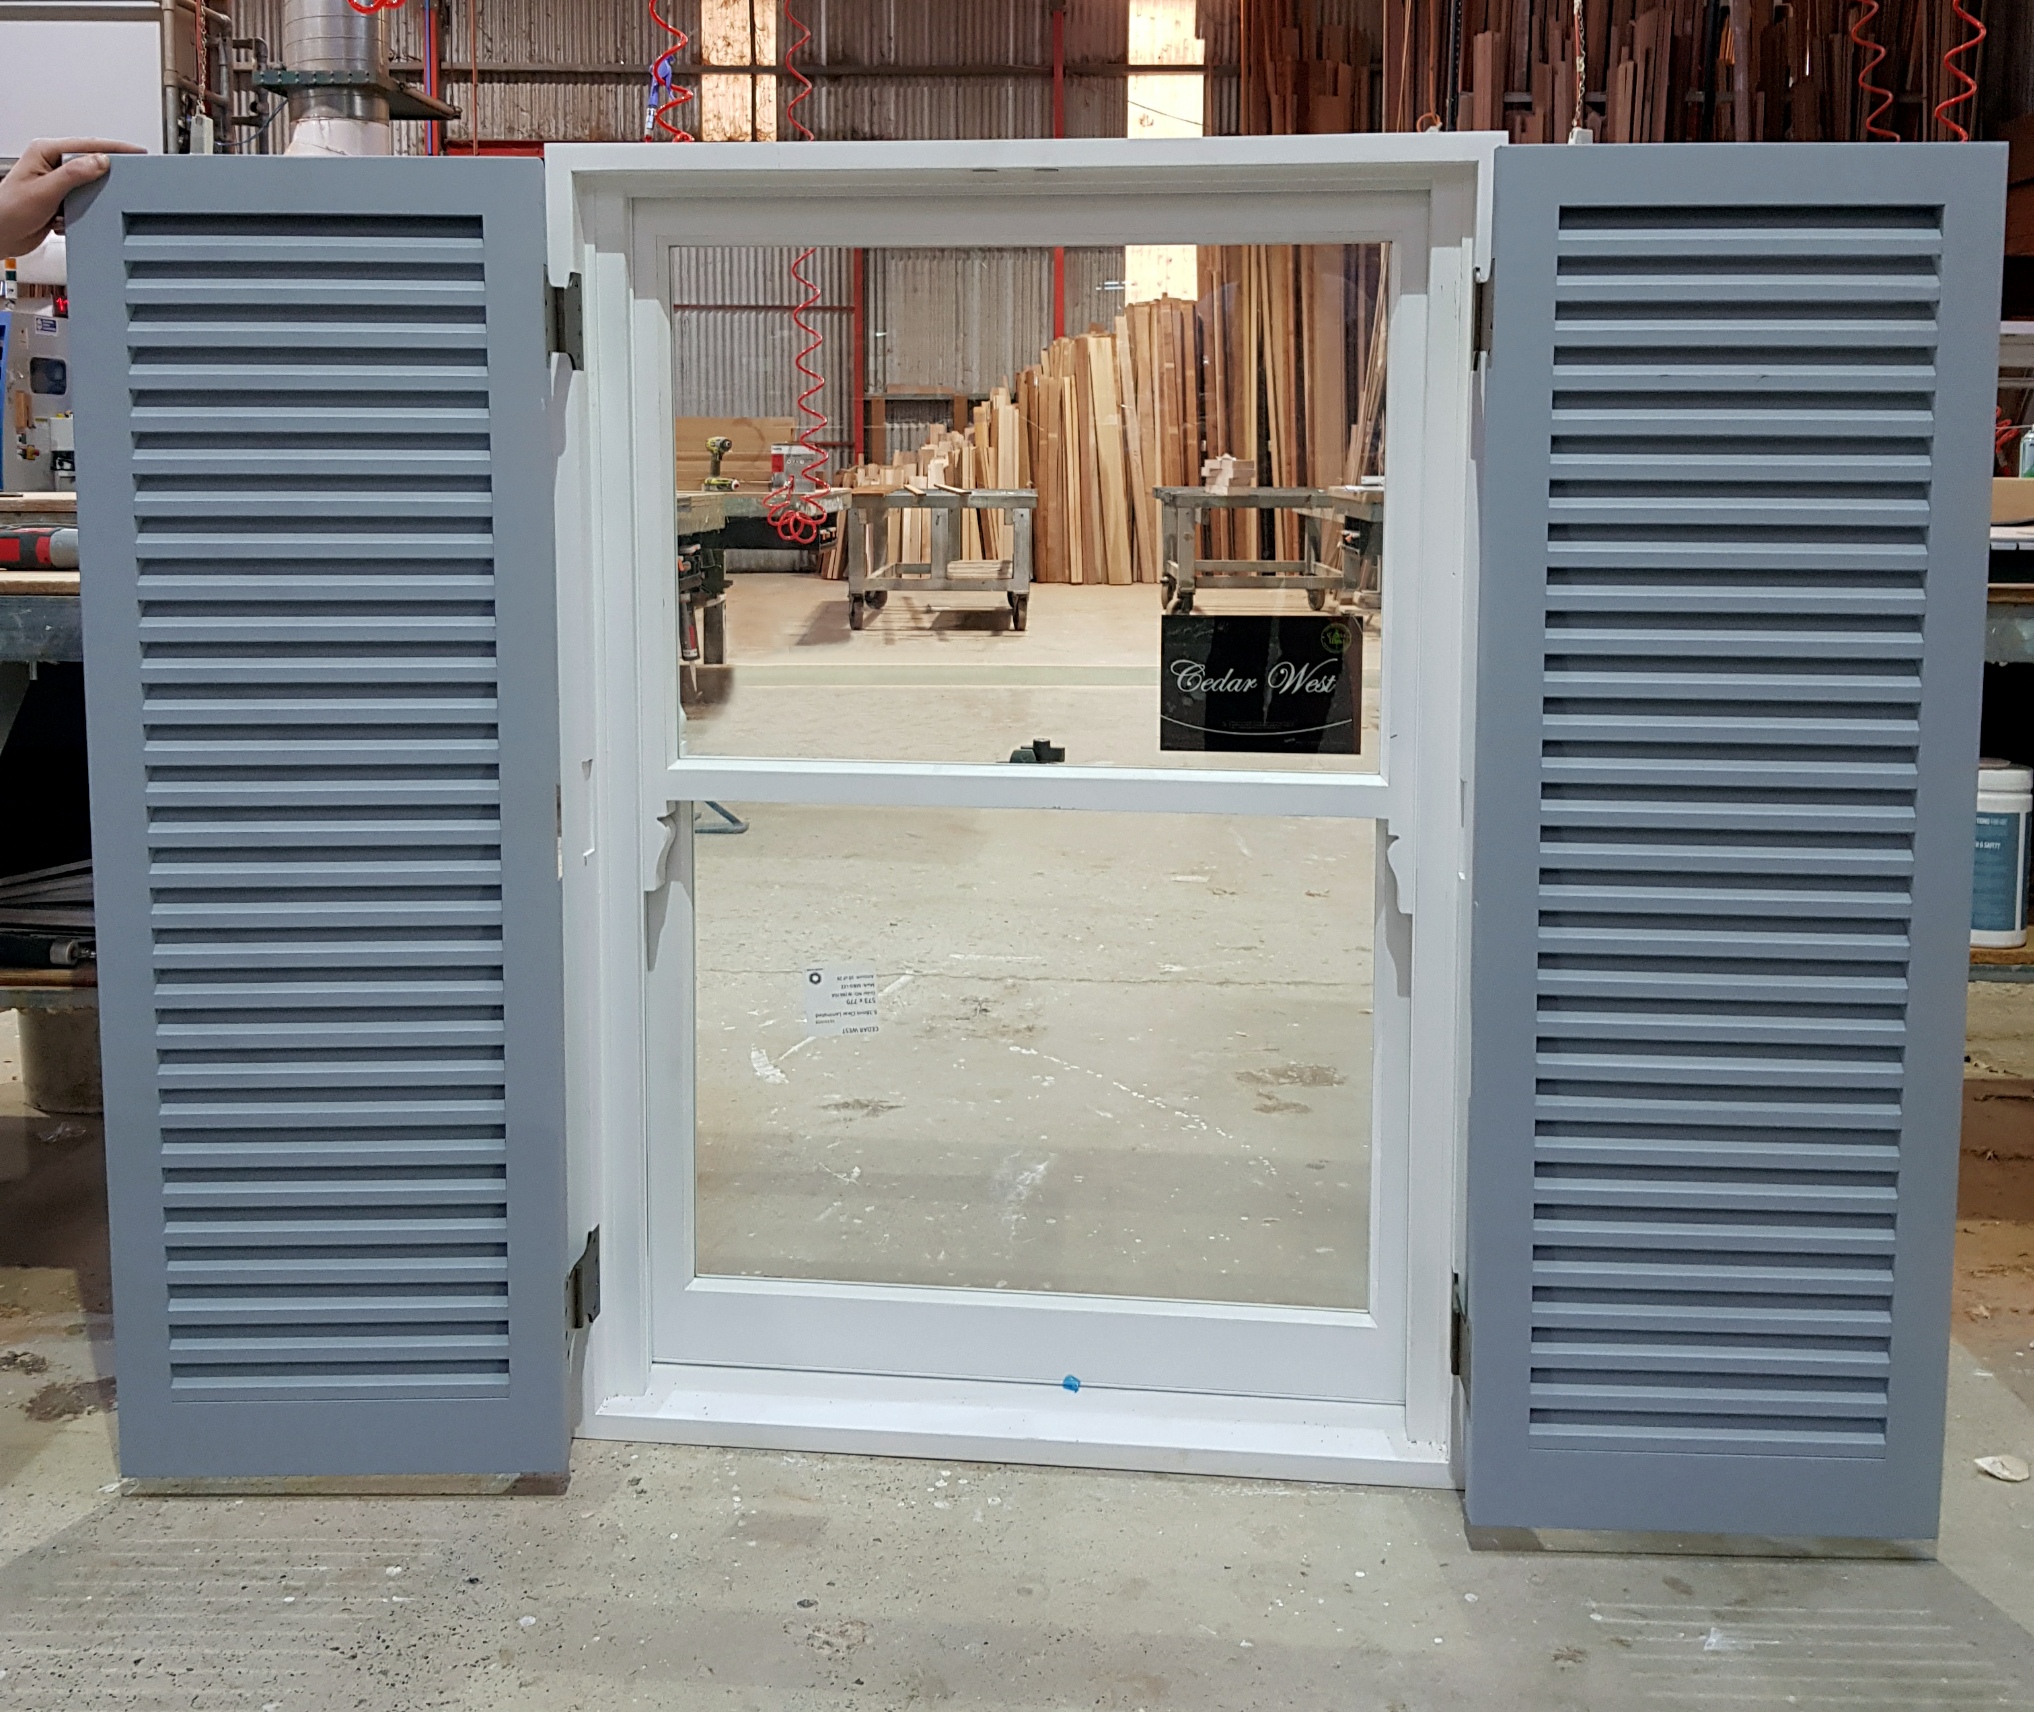 Double-hung window prefitted into frame with external timber shutters fitted